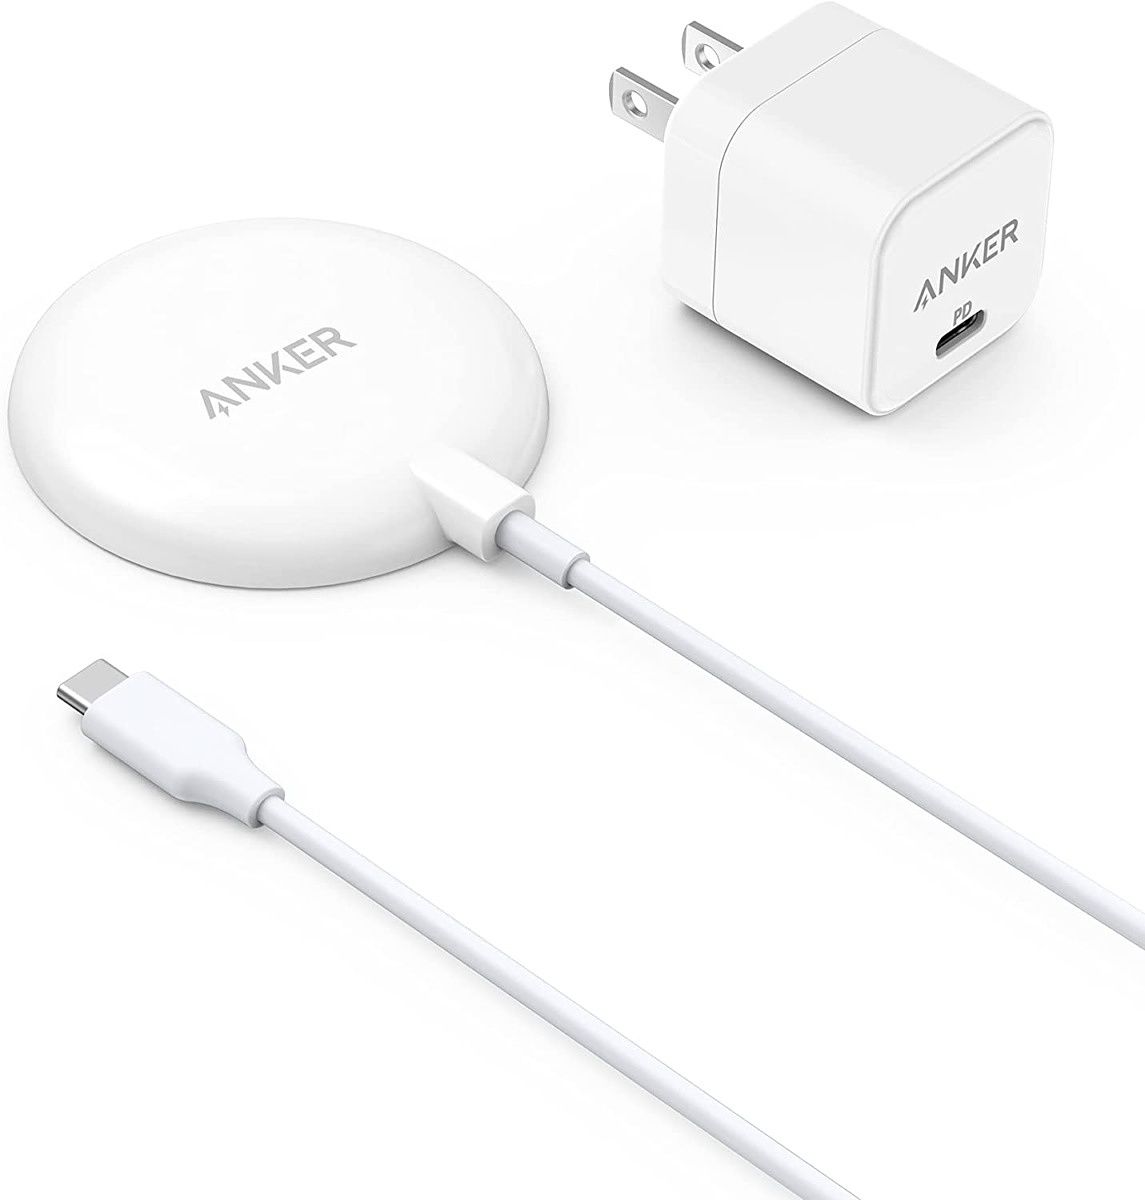 This magnetic charger from Anker can charge your iPhone at rather modest 7.5W speed. It has several safety measures in place, including radiation shielding, temperature control, and foreign object detection. The charger comes with a long 5ft cable and a 20W USB-C power adapter.